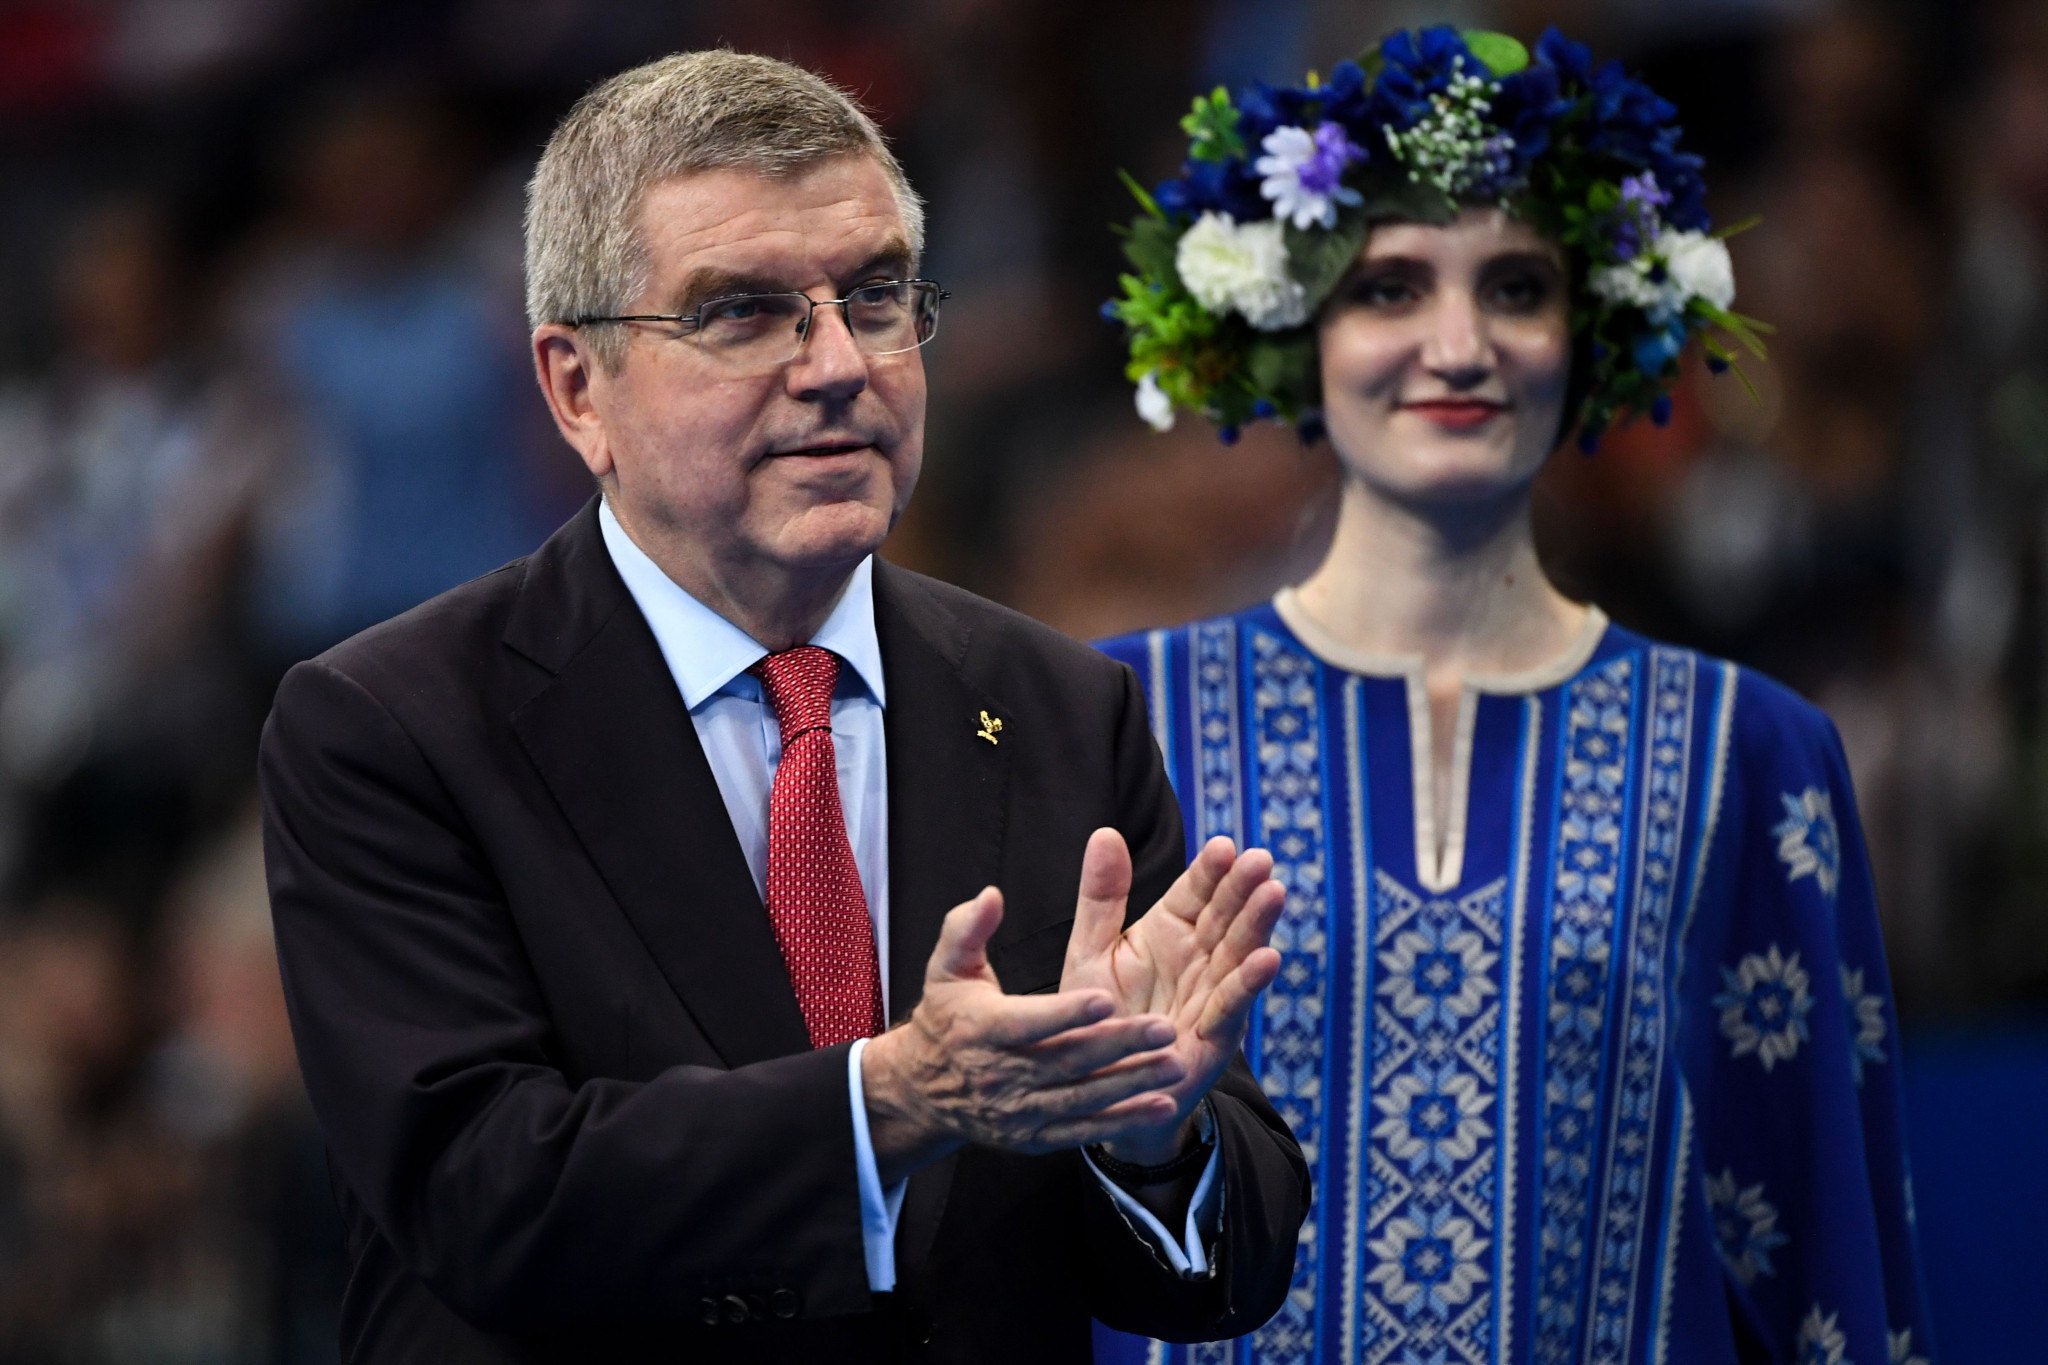 Bach had been at Minsk Arena earlier in the day, awarding medals in artistic gymnastics ©Getty Images